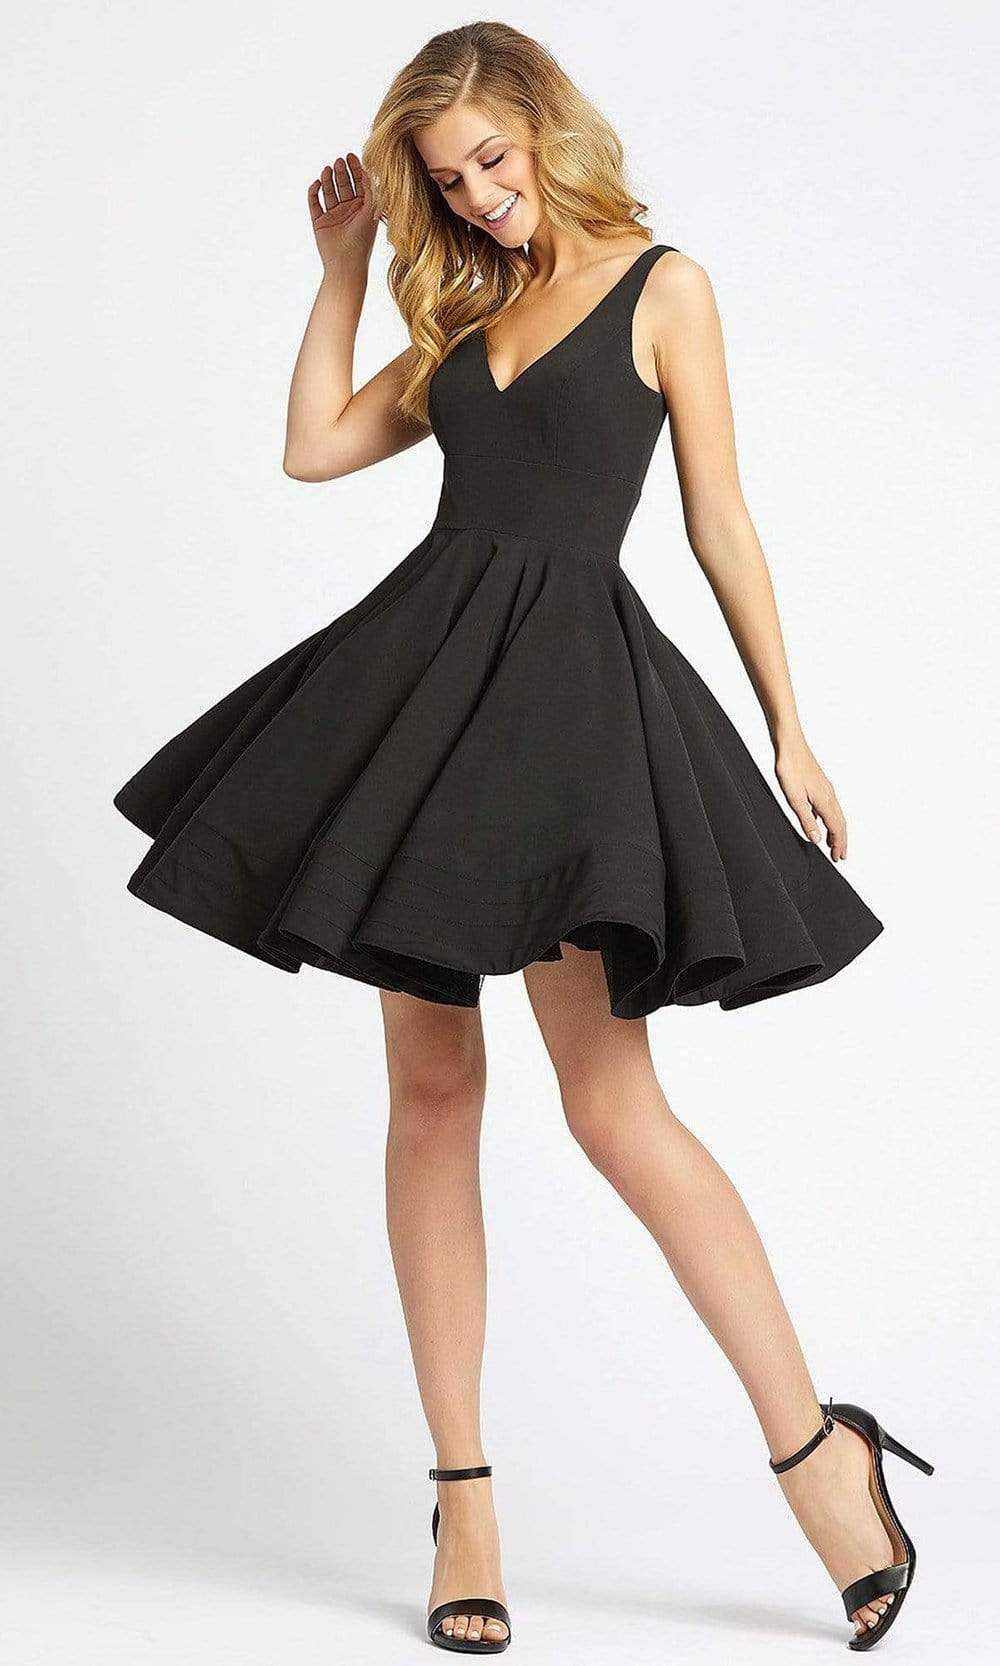 Ieena Duggal, Ieena Duggal - 48478 V-Neck Flutter Cocktail Dress - 1 pc Black in Size 2 Available